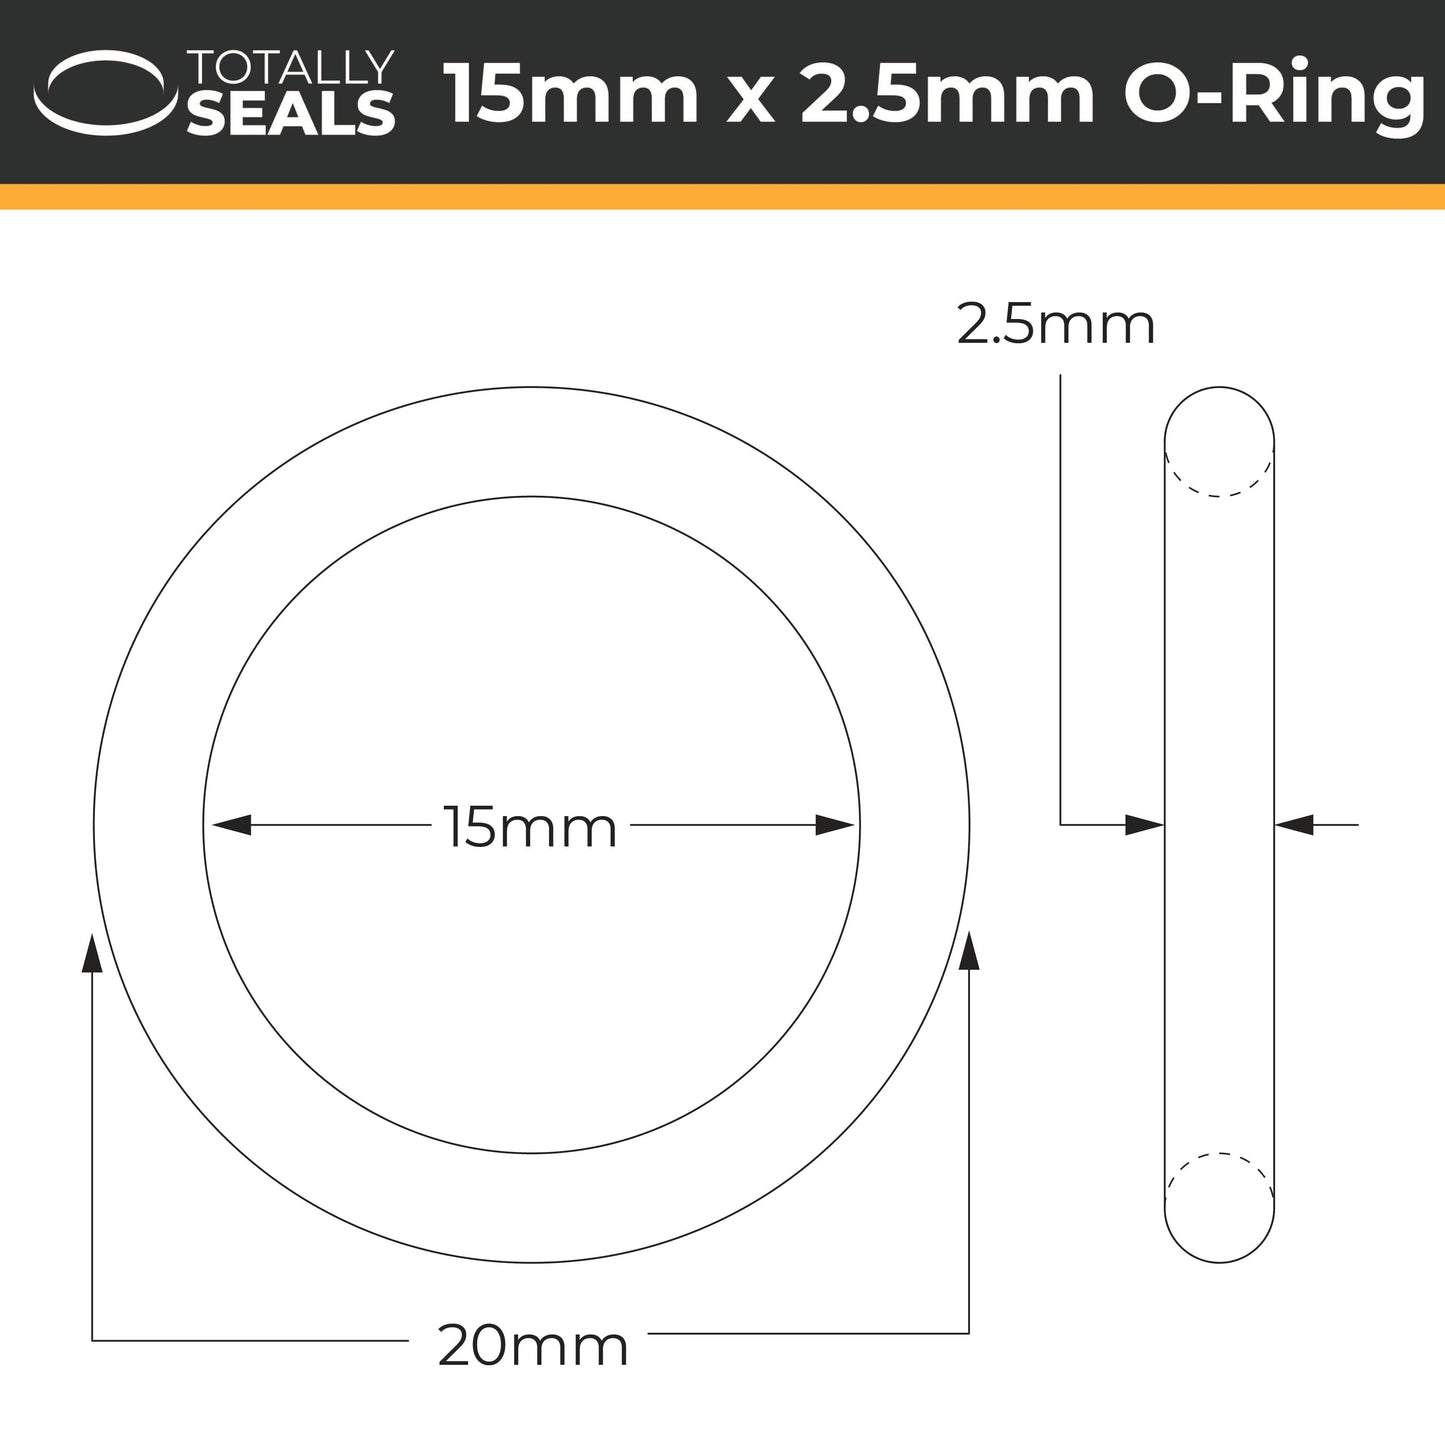 15mm x 2.5mm (20mm OD) Silicone O-Rings - Totally Seals®